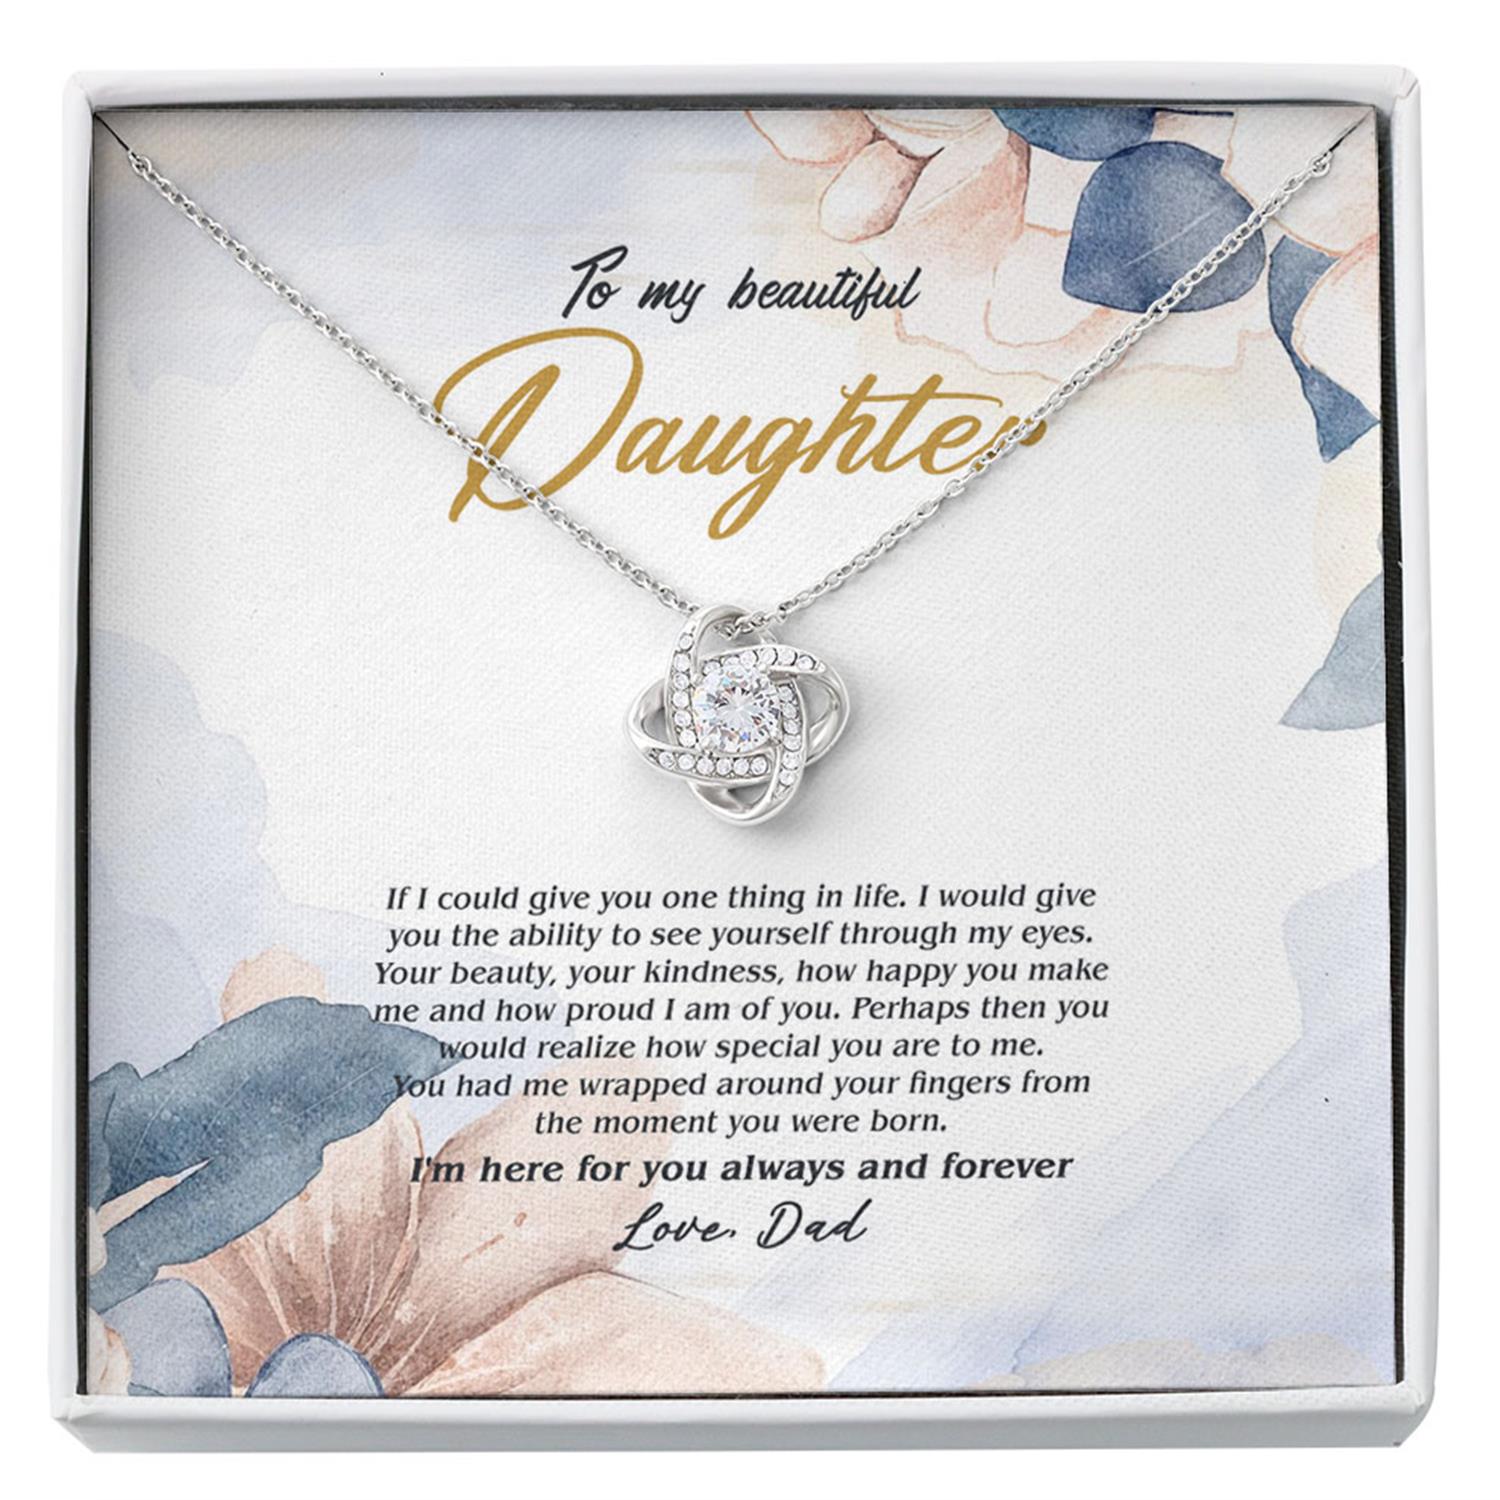 Daughter Necklace, To My Beautiful Daughter Necklace, Gift For Daughter From Dad, Father Daughter Custom Necklace